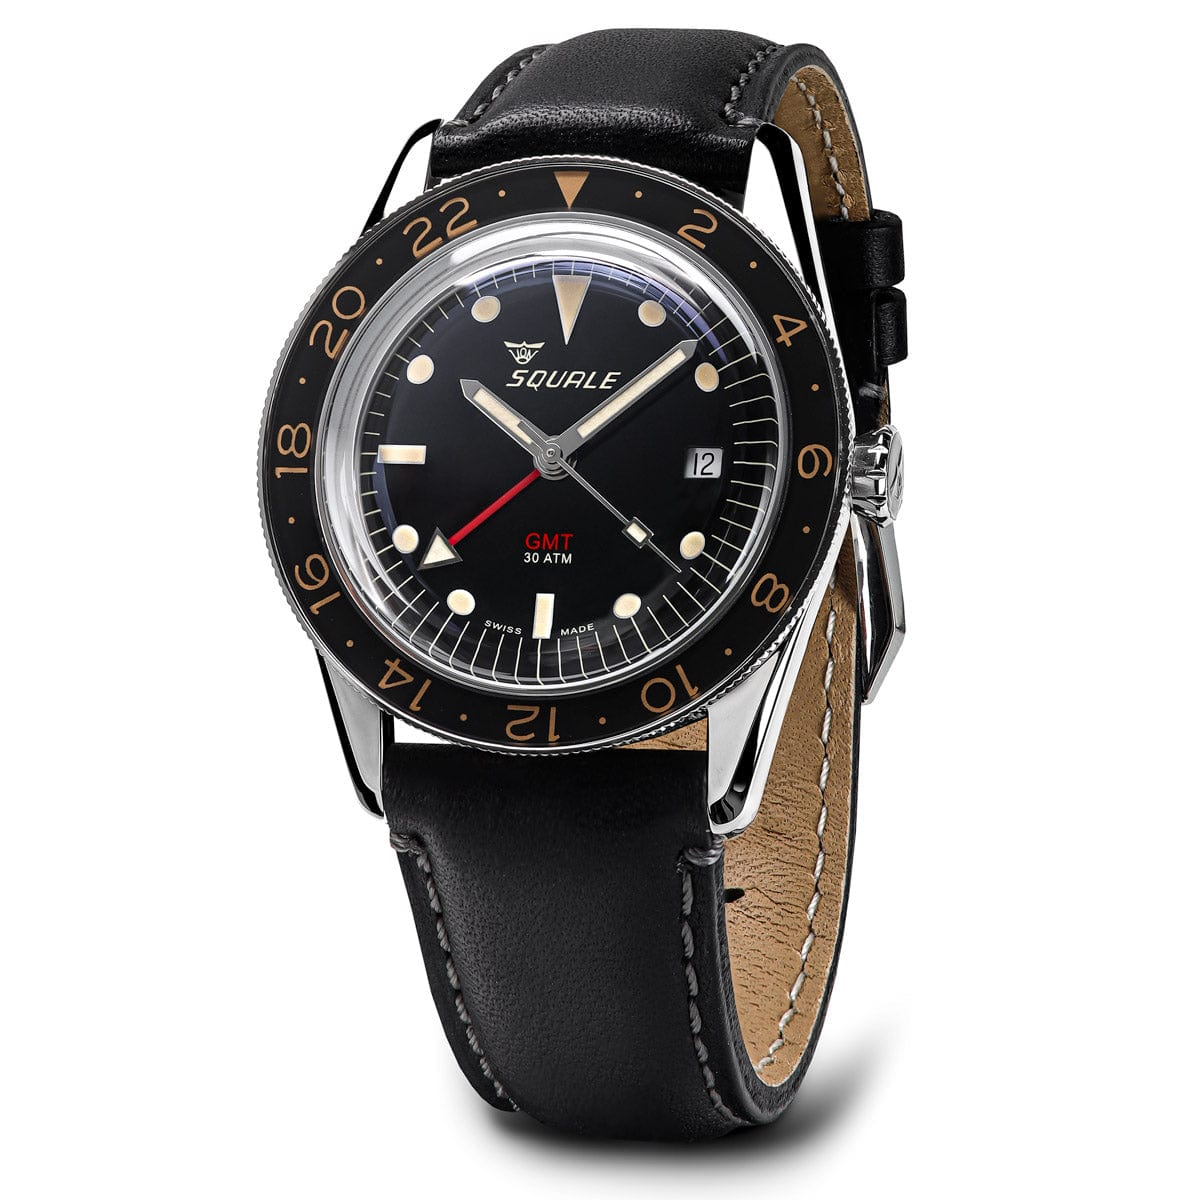 Squale Sub-39 GMT Vintage Swiss Made Diver's Watch